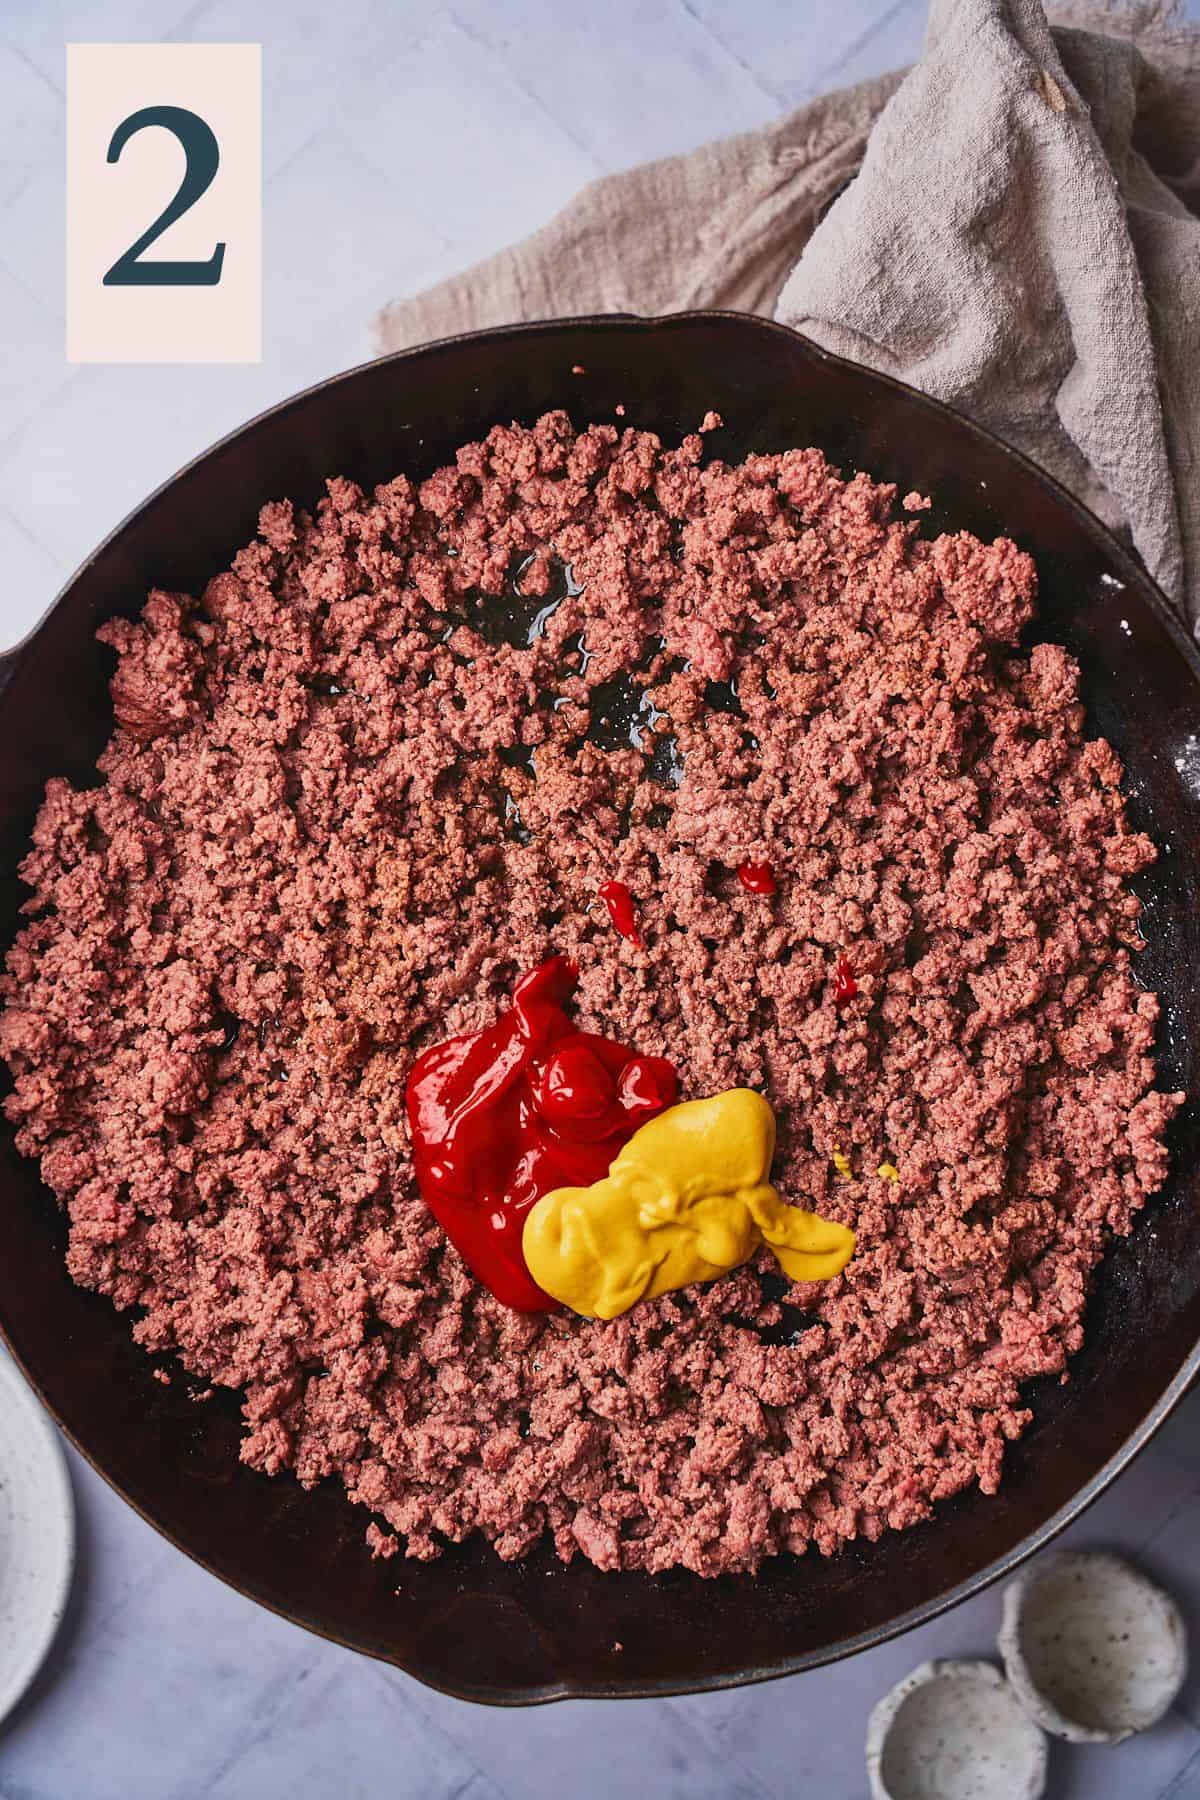 cooked ground beef in a skillet seasoned with ketchup and mustard.